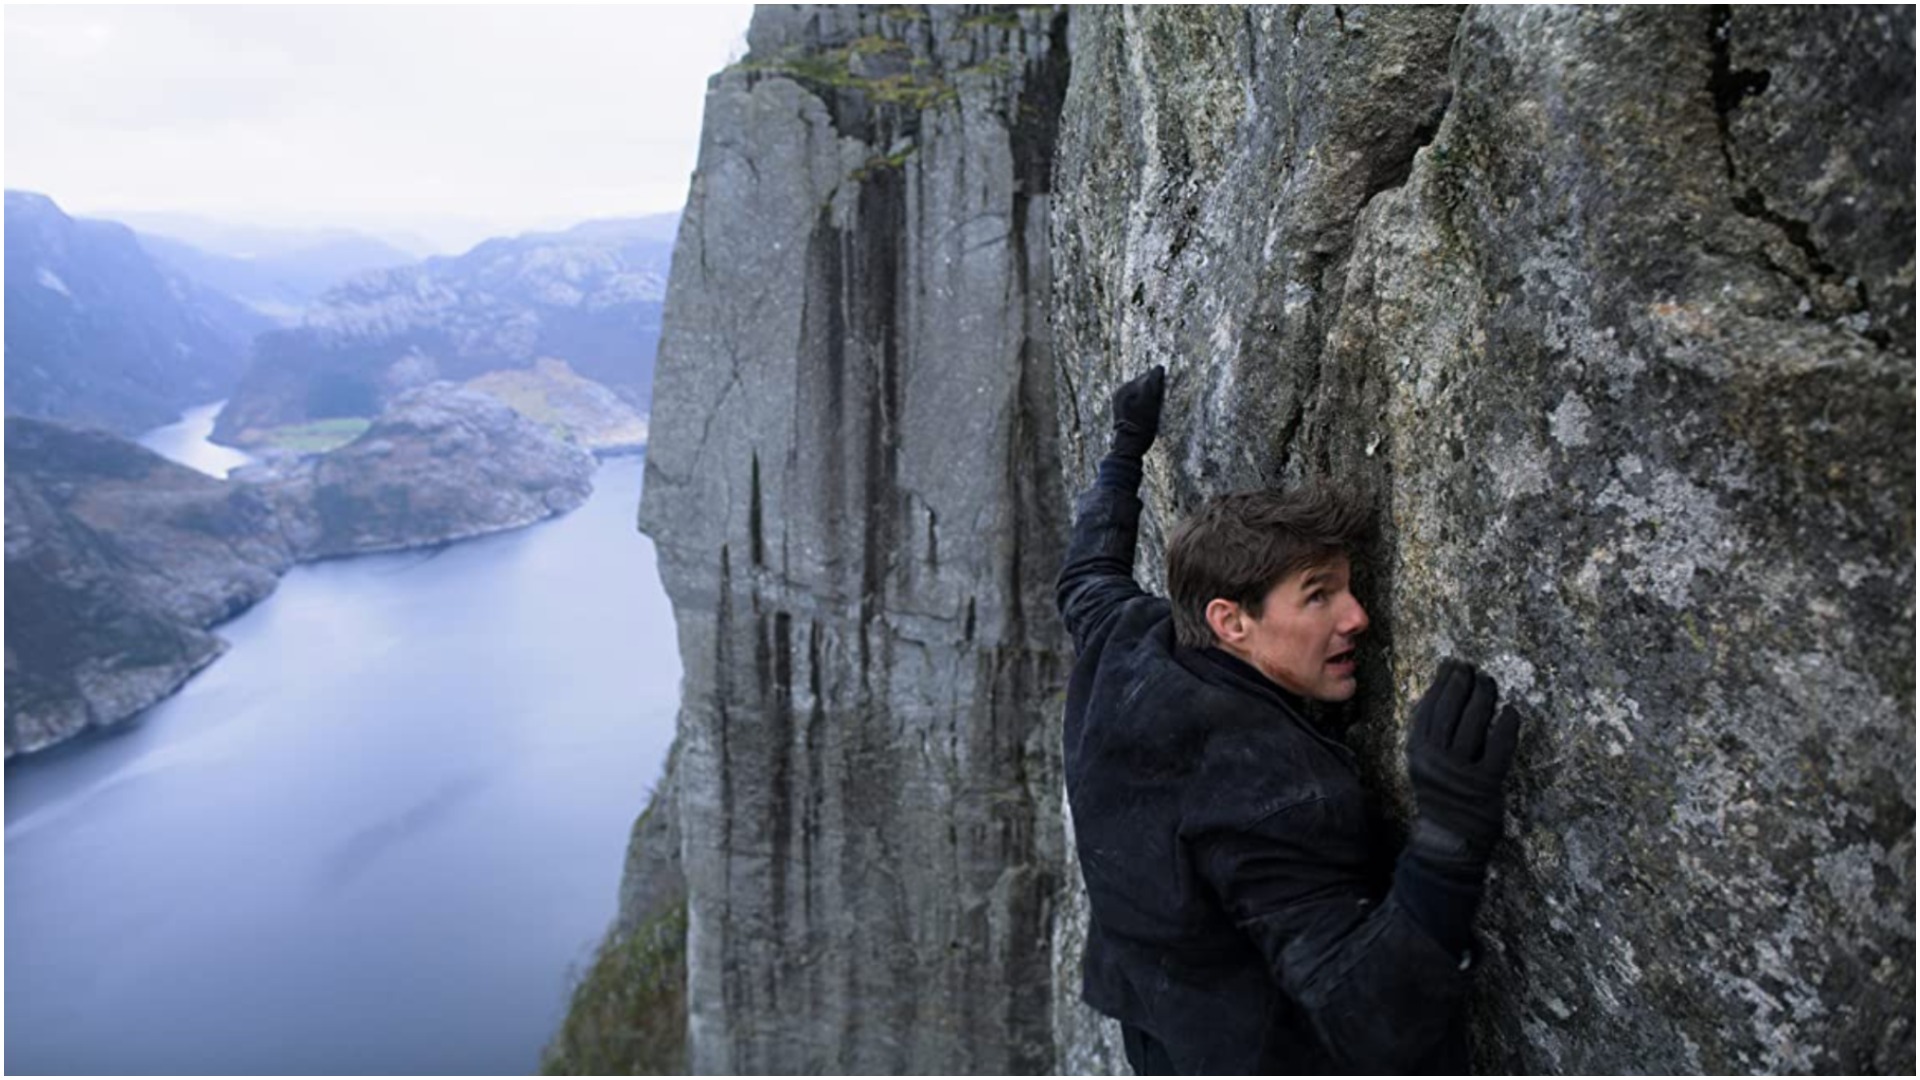 New Mission: Impossible 7 footage revealed